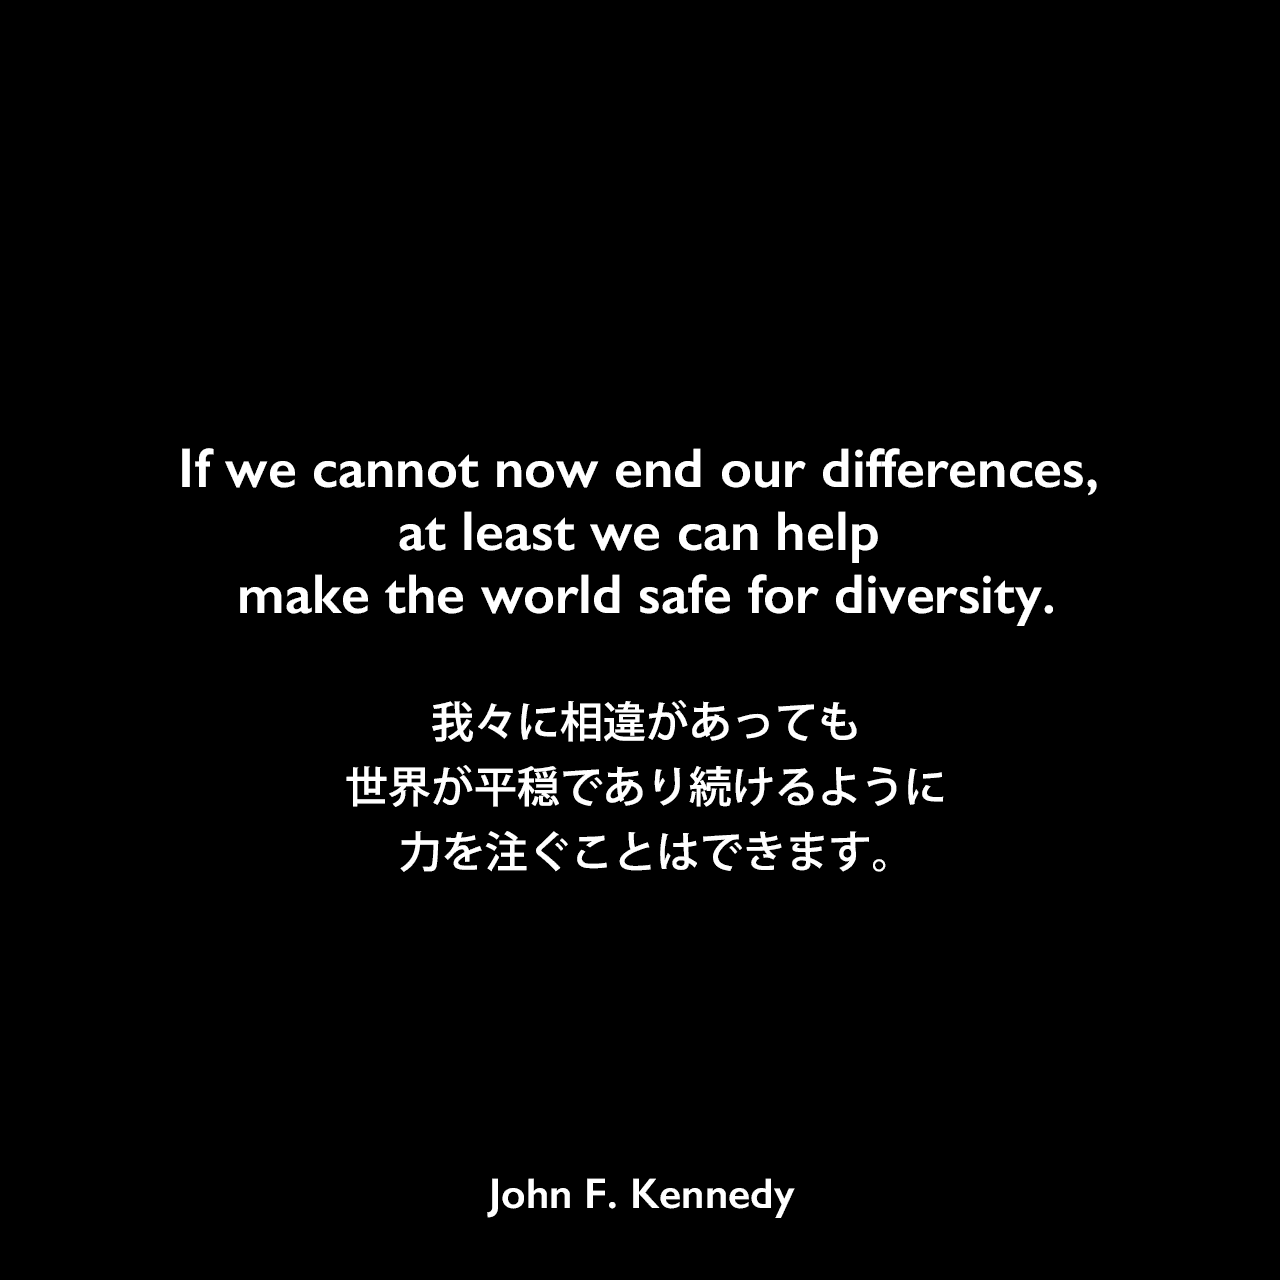 If we cannot now end our differences, at least we can help make the world safe for diversity.我々に相違があっても世界が平穏であり続けるように力を注ぐことはできます。- アメリカン大学卒業式における演説「平和のための戦略 (THE STRATEGY OF PEACE) 」よりJohn F Kennedy